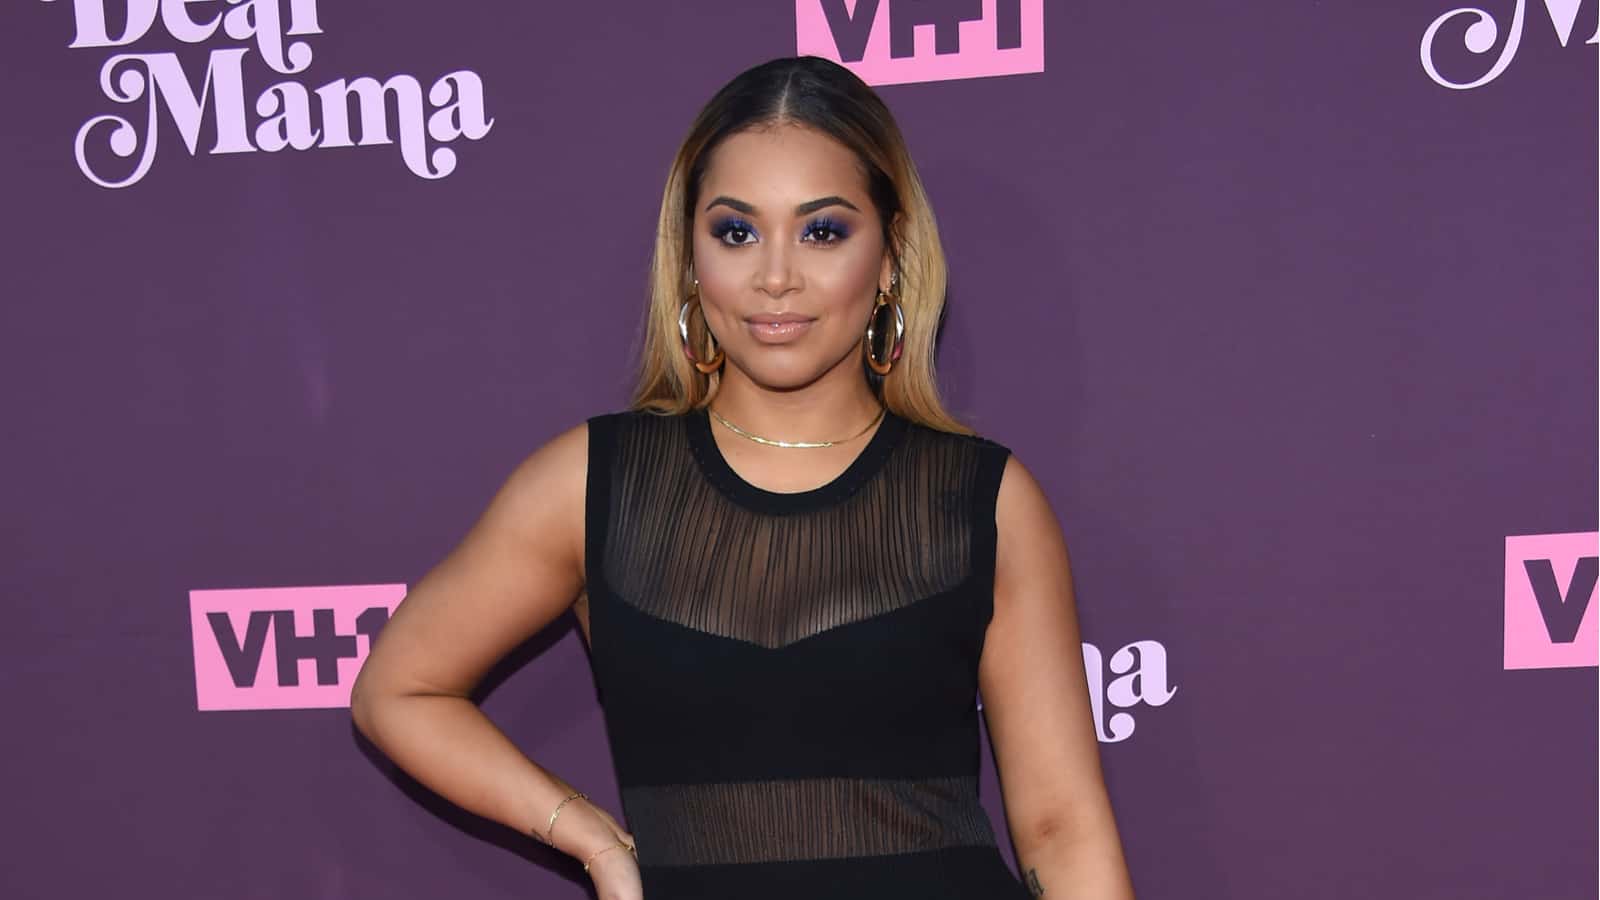 At the moment, the estimated net worth of actress Lauren London is around $...